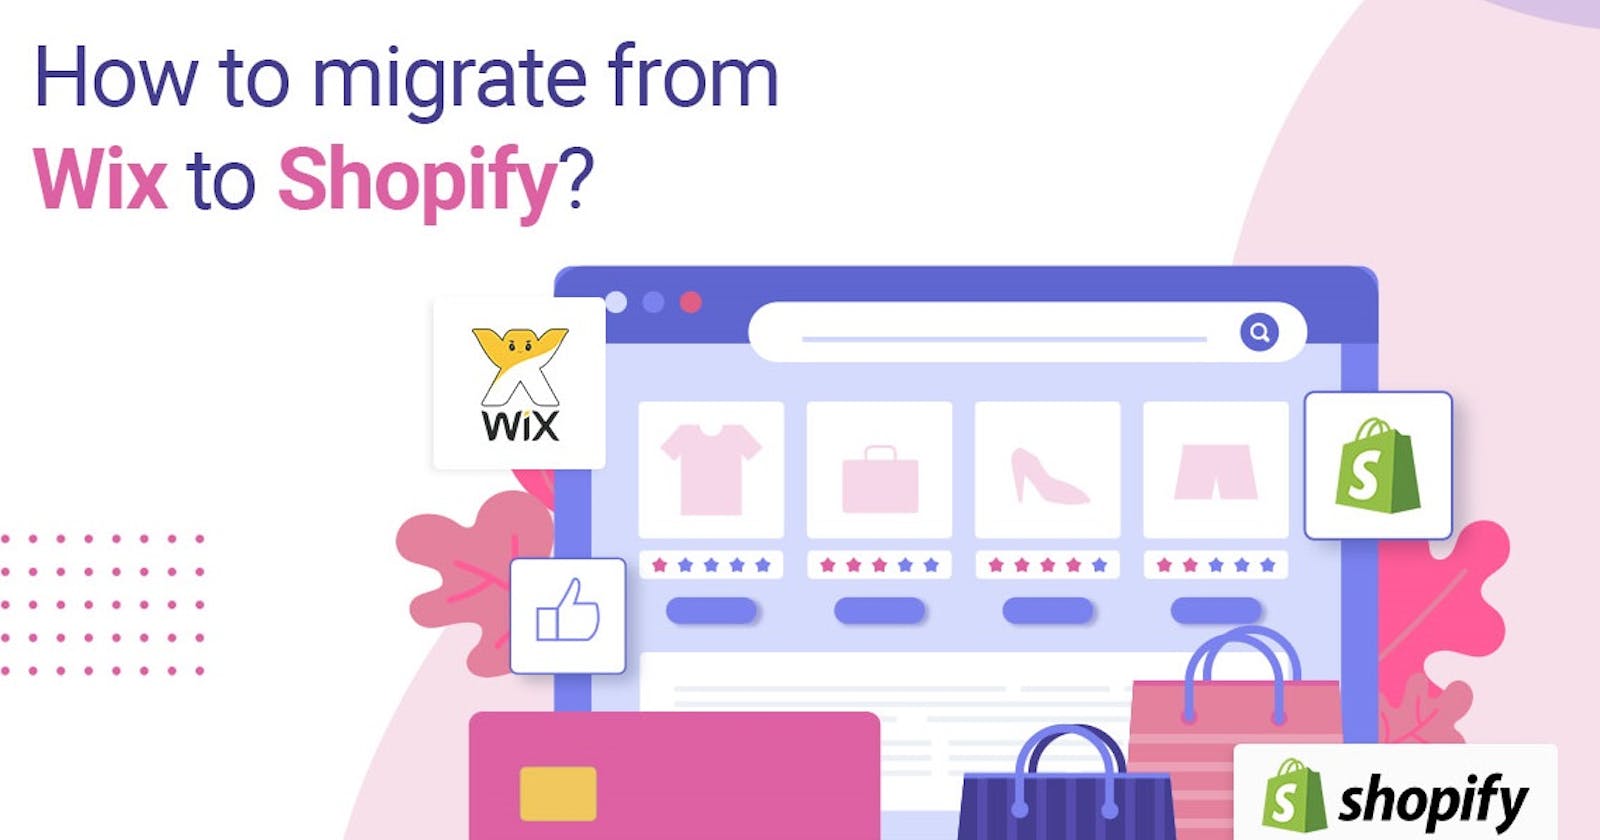 How to migrate from Wix to Shopify?